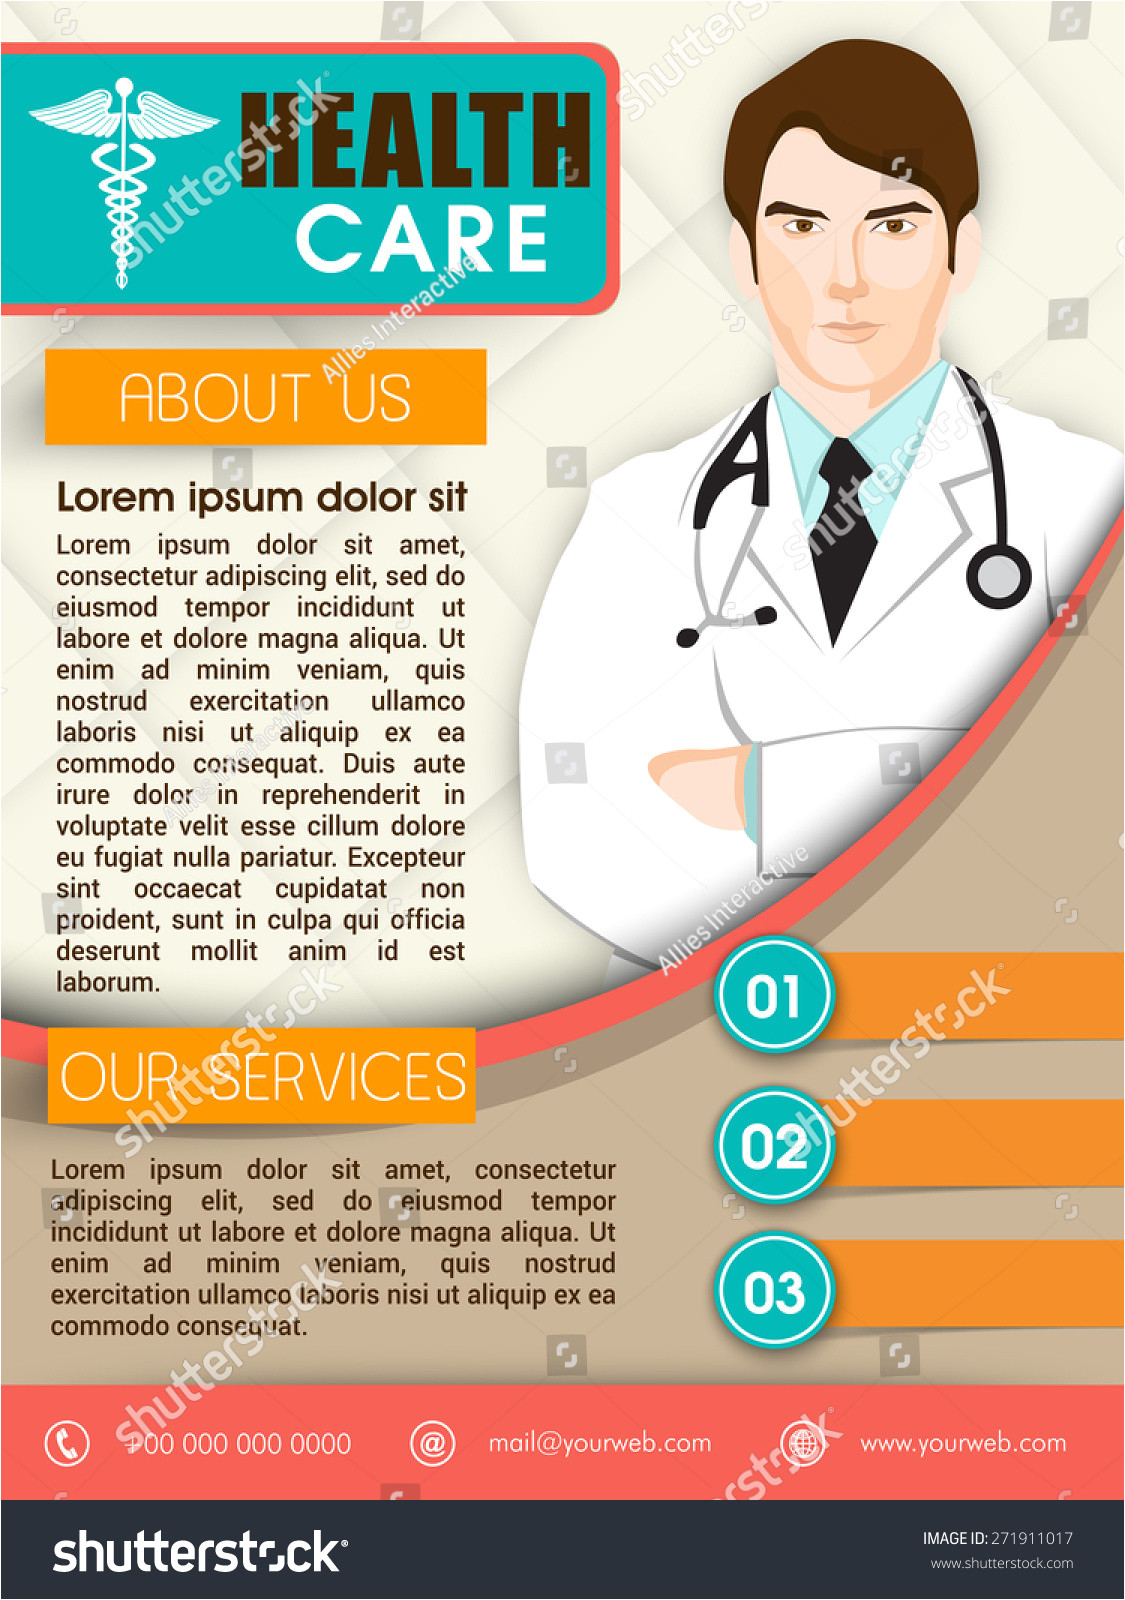 stock vector health care template brochure or flyer design with illustration of a doctor